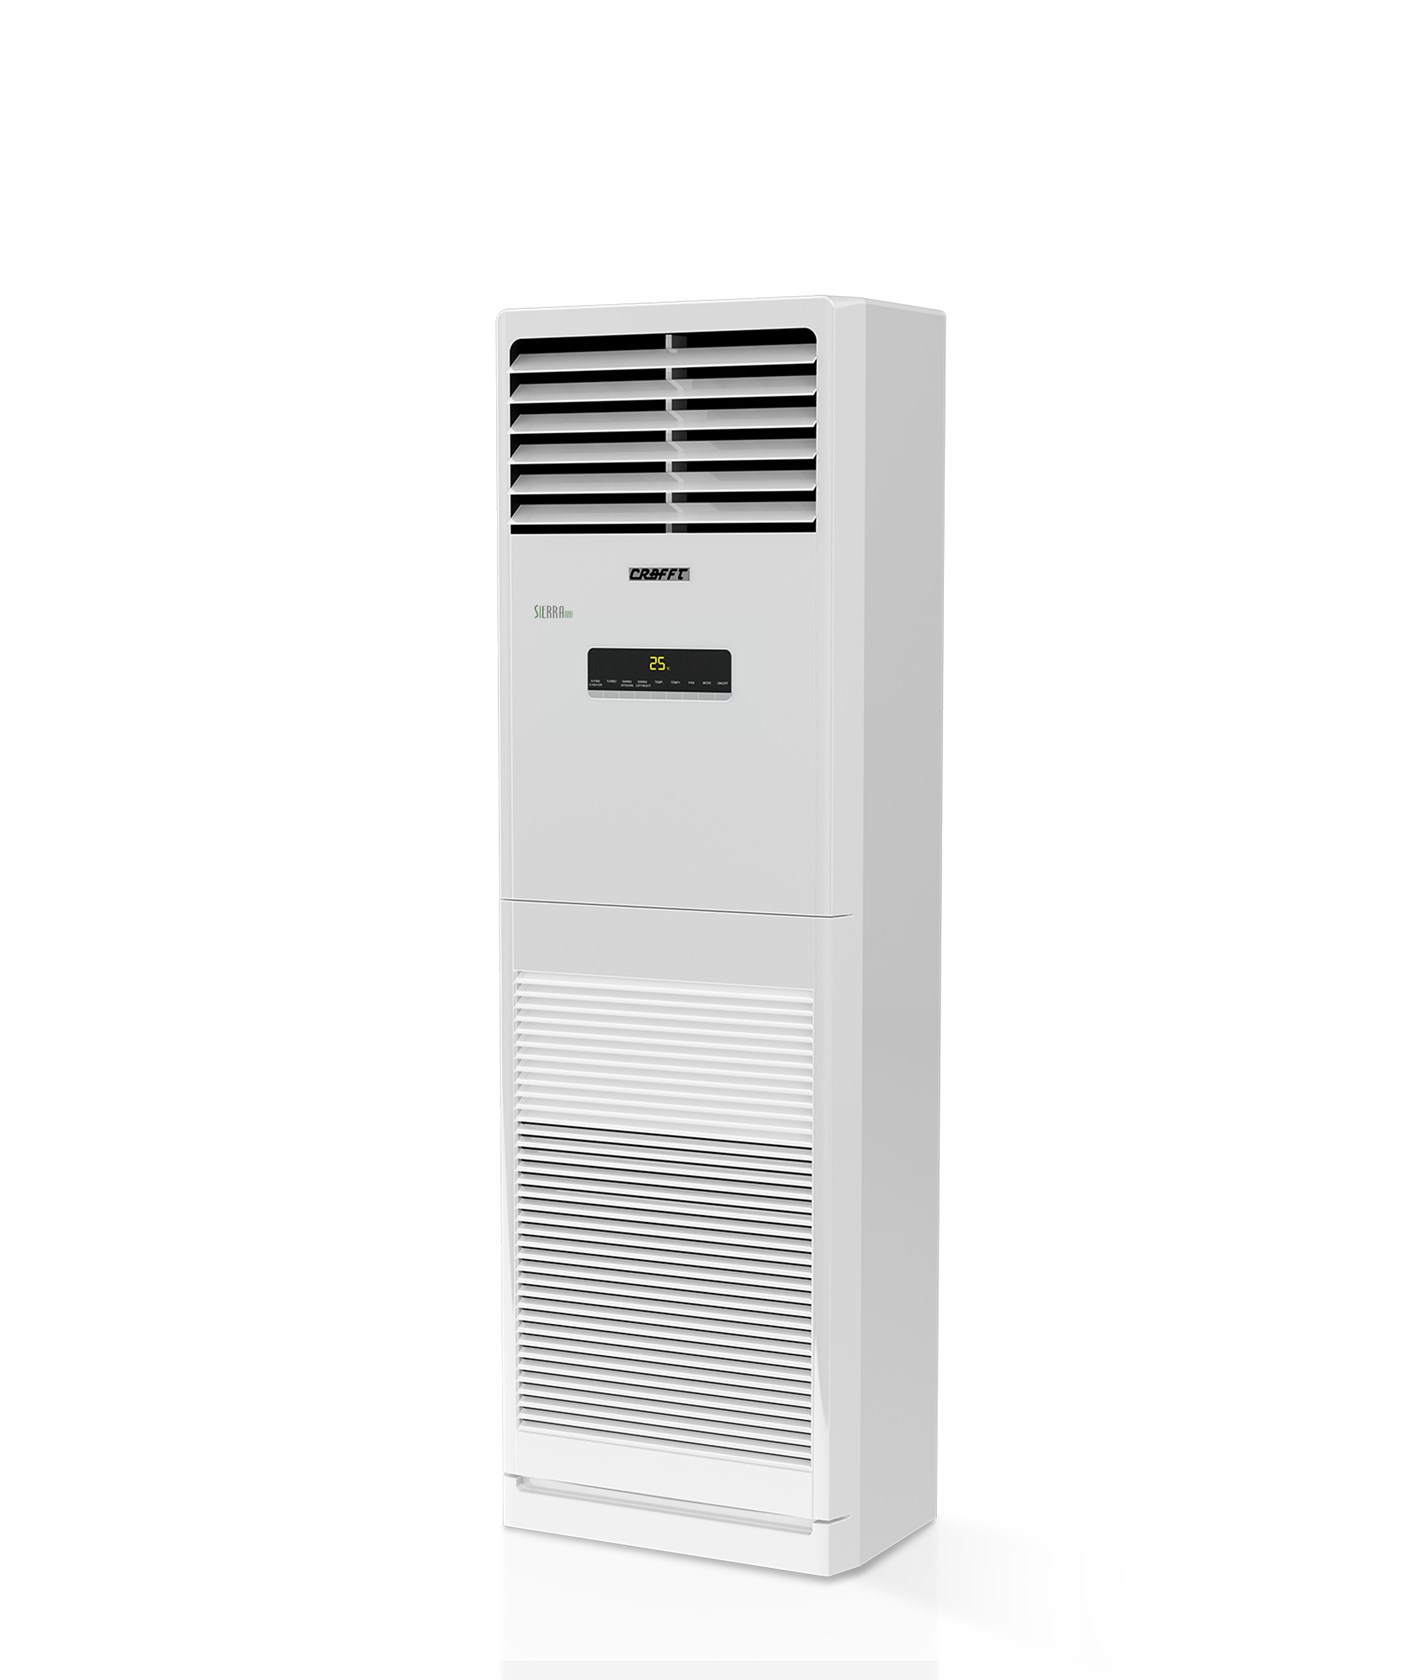 Floor Stand Split 5 Ton||Air Conditioners 